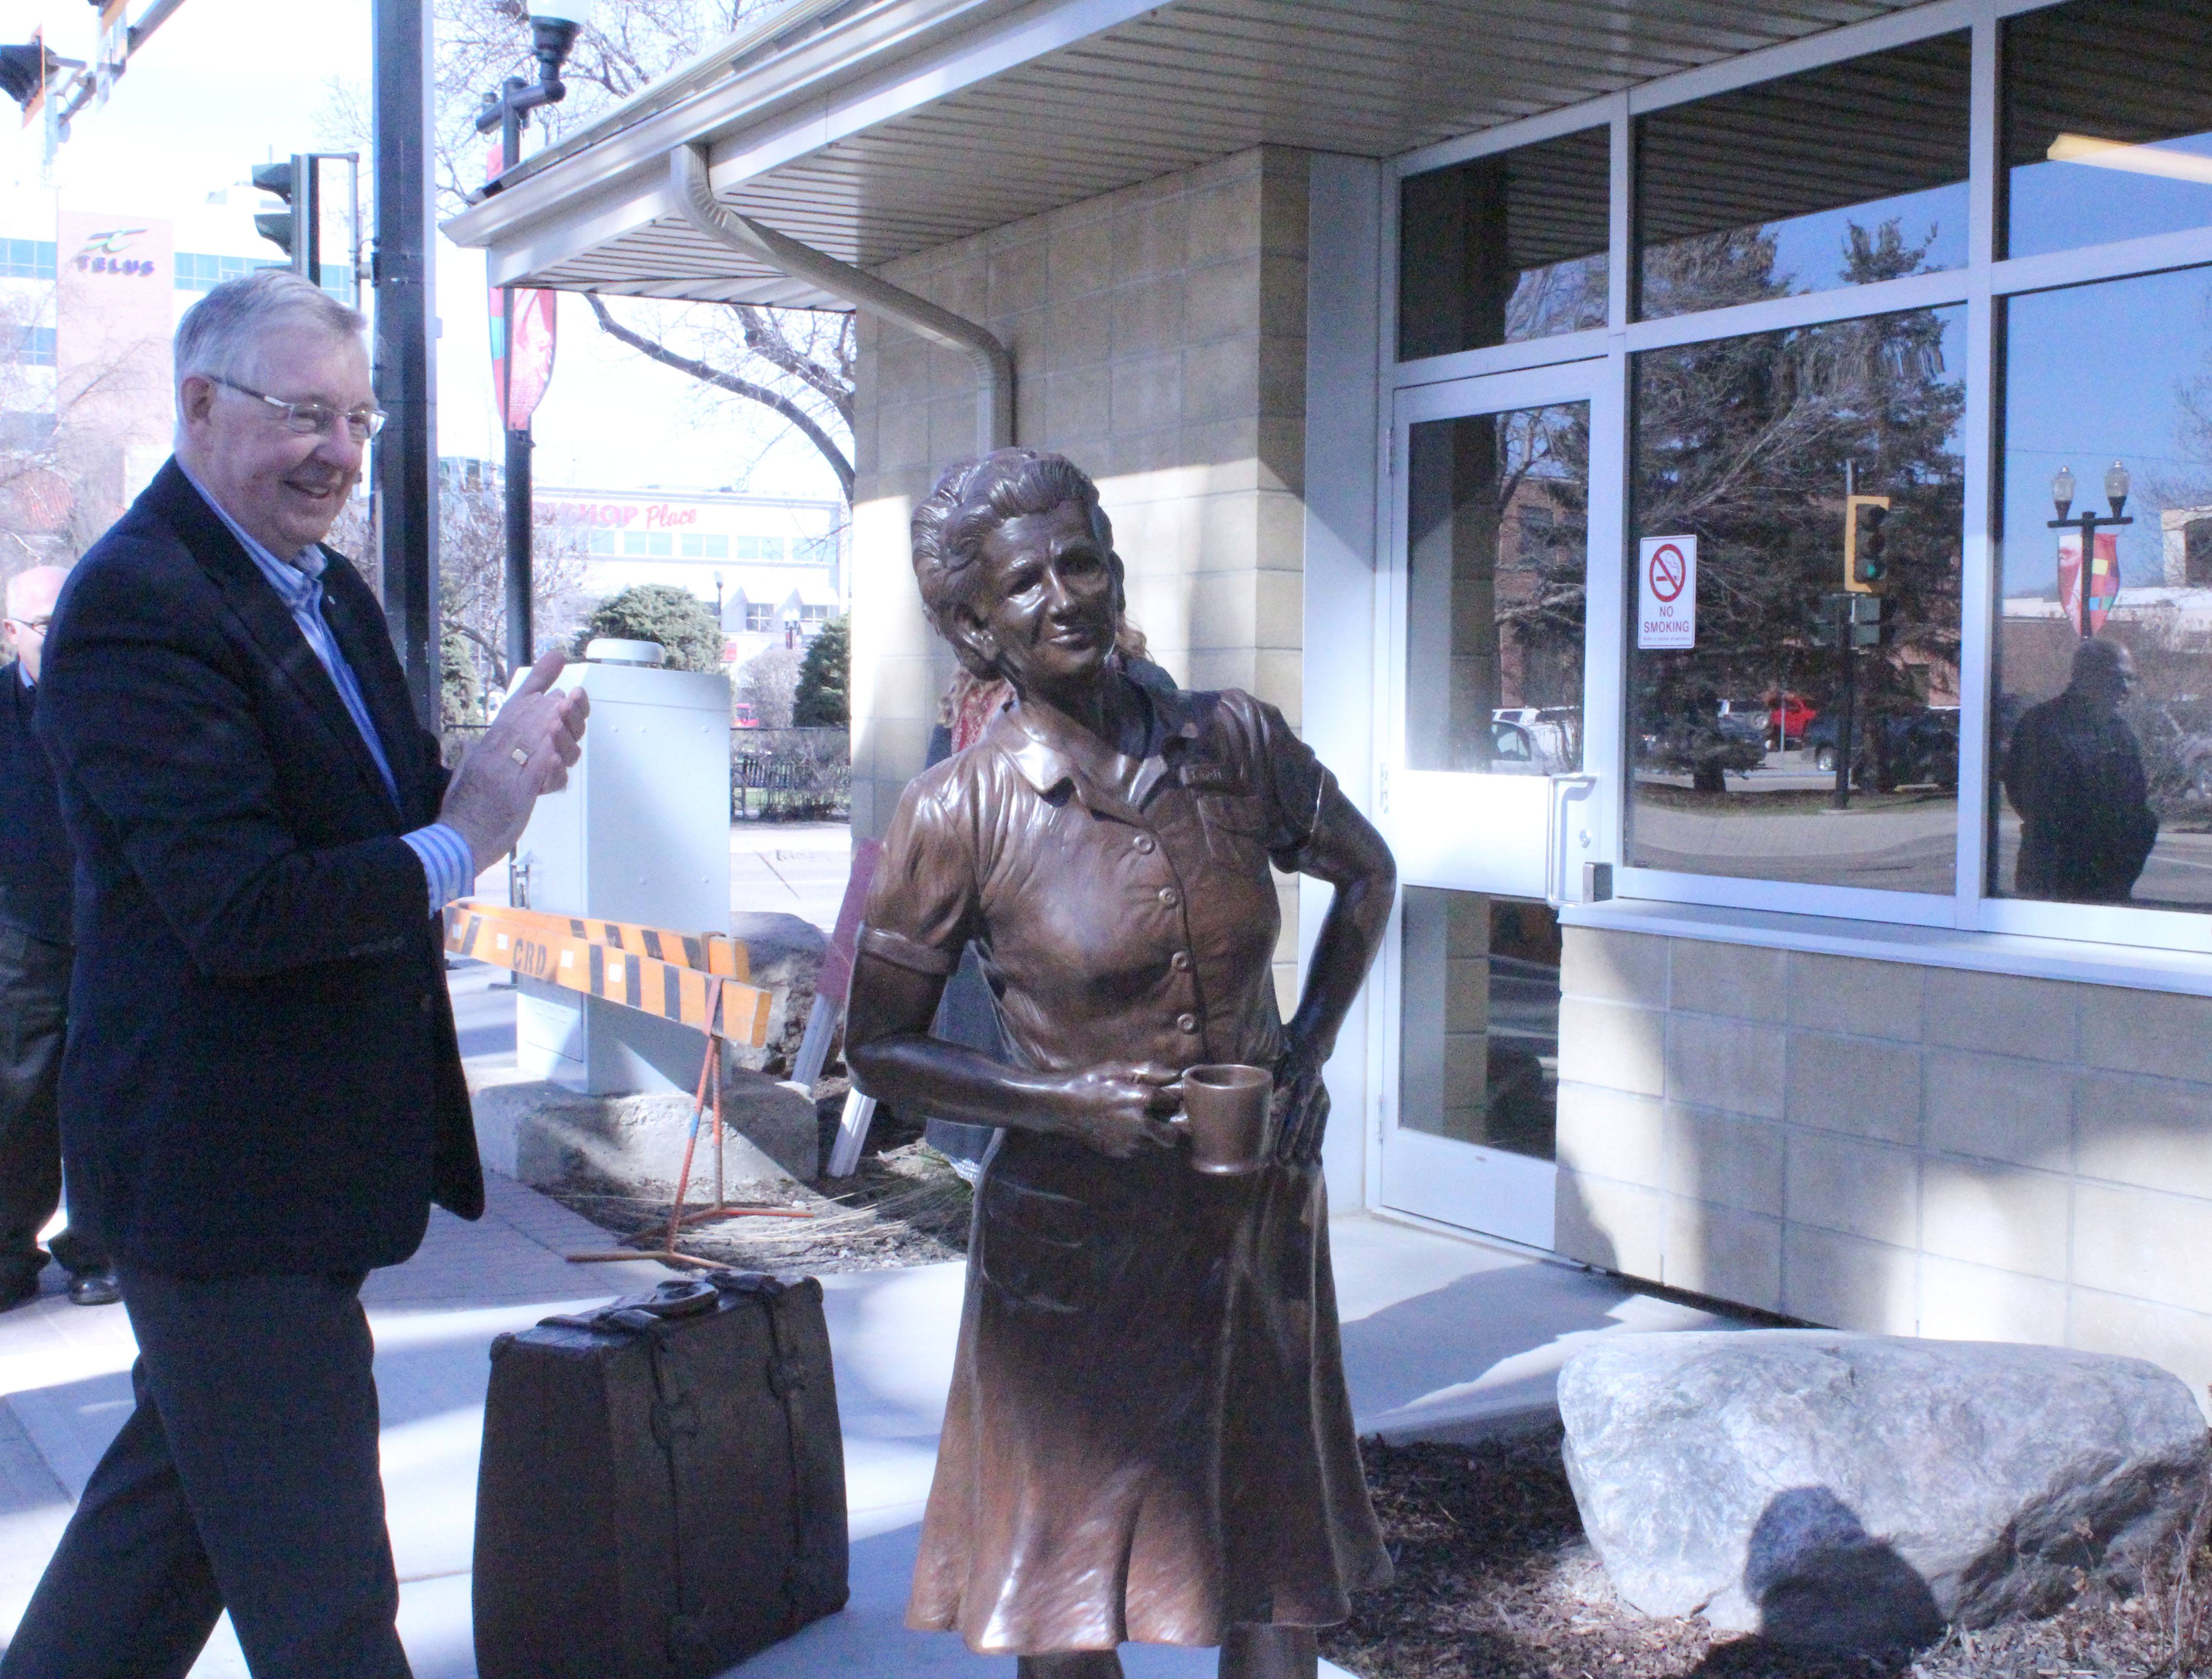 UNVEILING- Mayor Morris Flewwelling unveils the 10th bronze ghost in Red Deer. This sculpture captures the likeness of Julietta Sorensen who was instrumental in bringing a transit system to Red Deer.